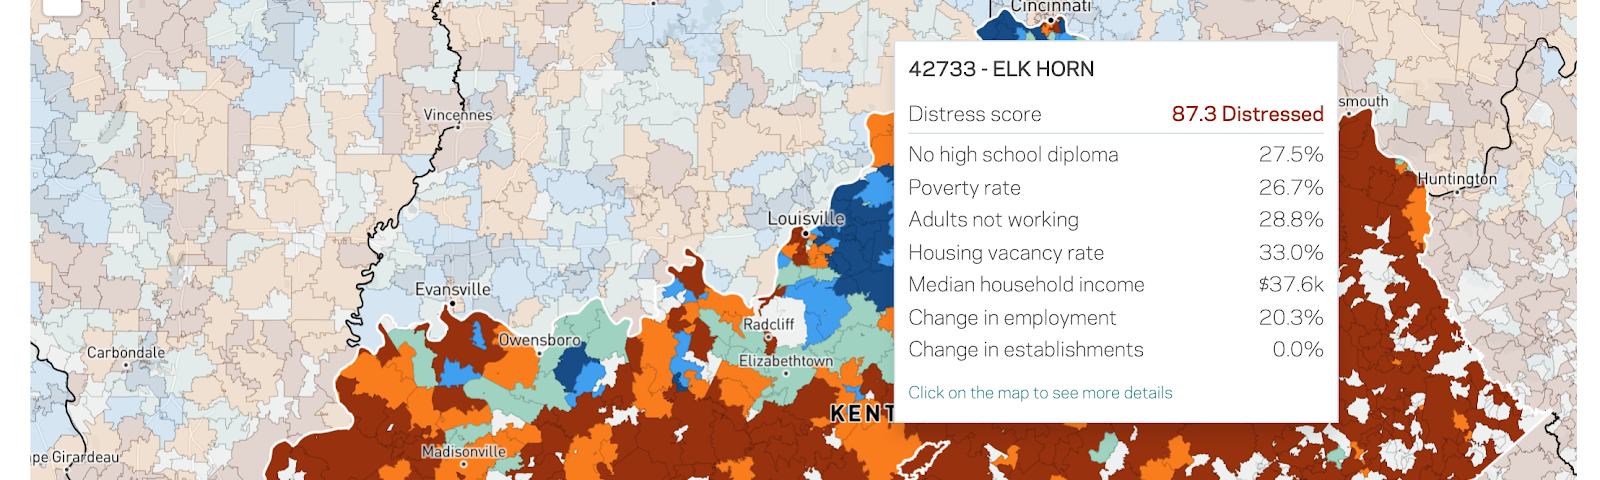 A choropleth map of distressed zip codes in the state of Kentucky.